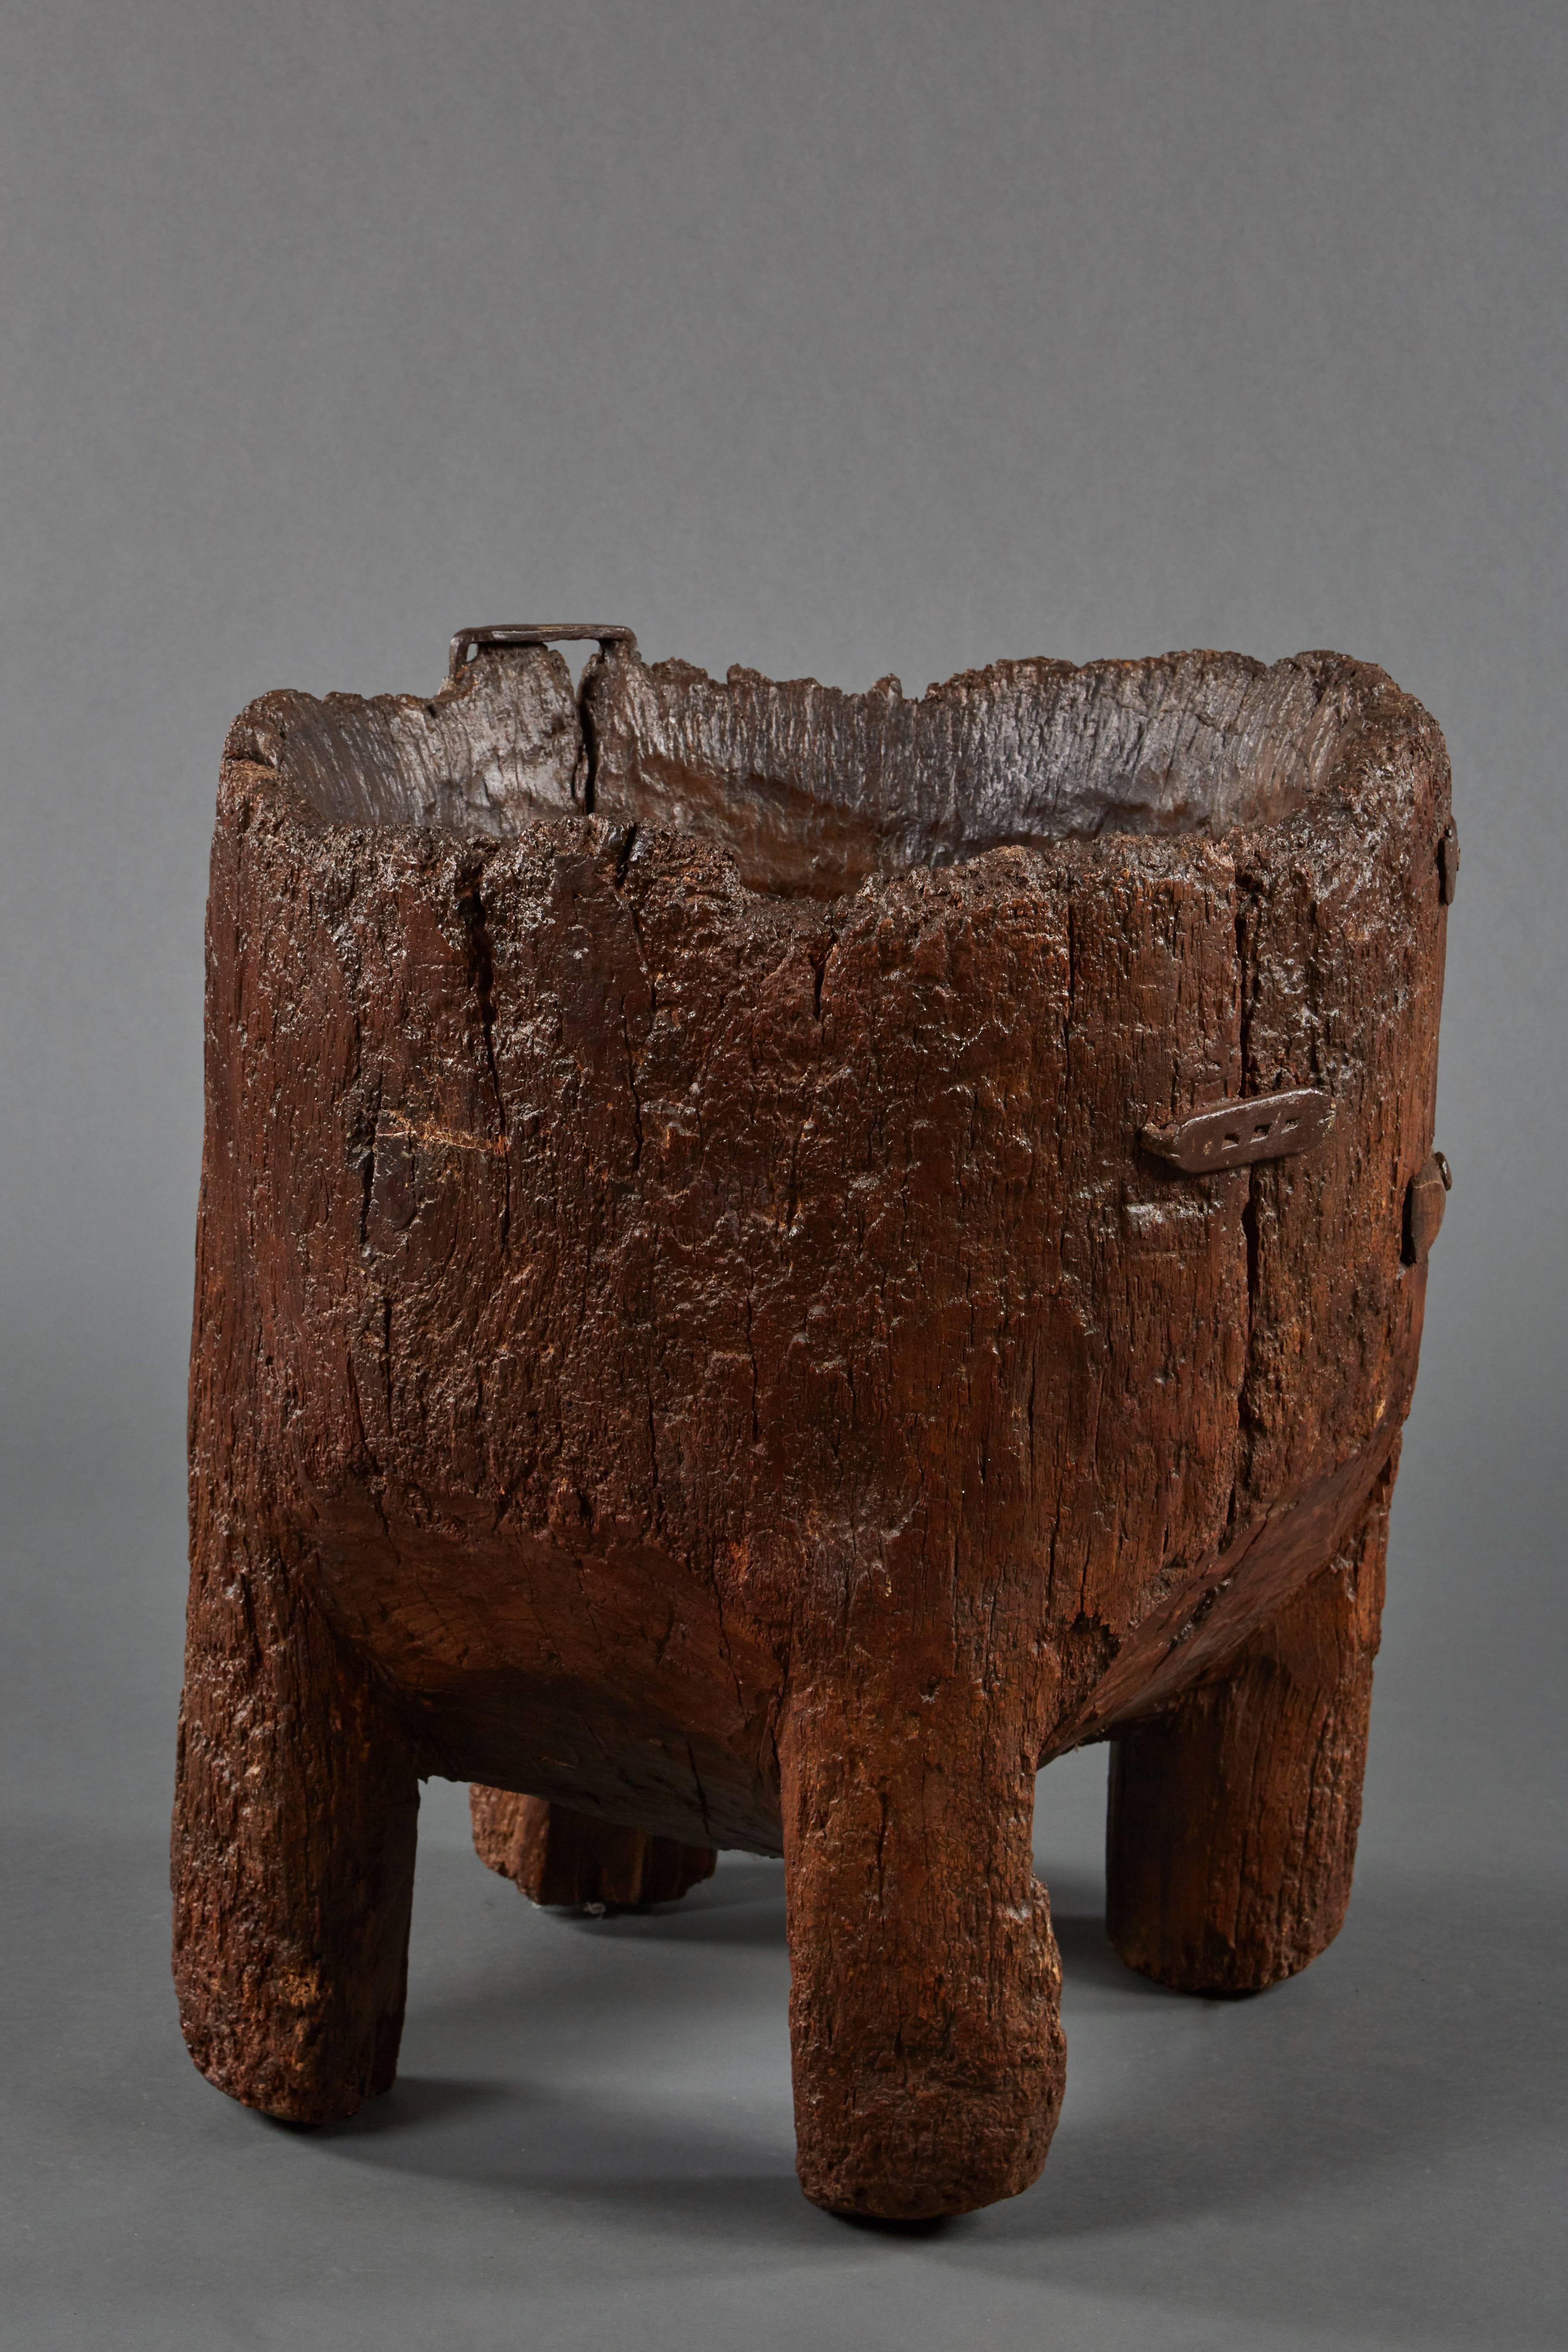 Impressive and grand antique chestnut mortar, its large wood bowl revealing Primitive exterior joints and resting on four weighty legs.